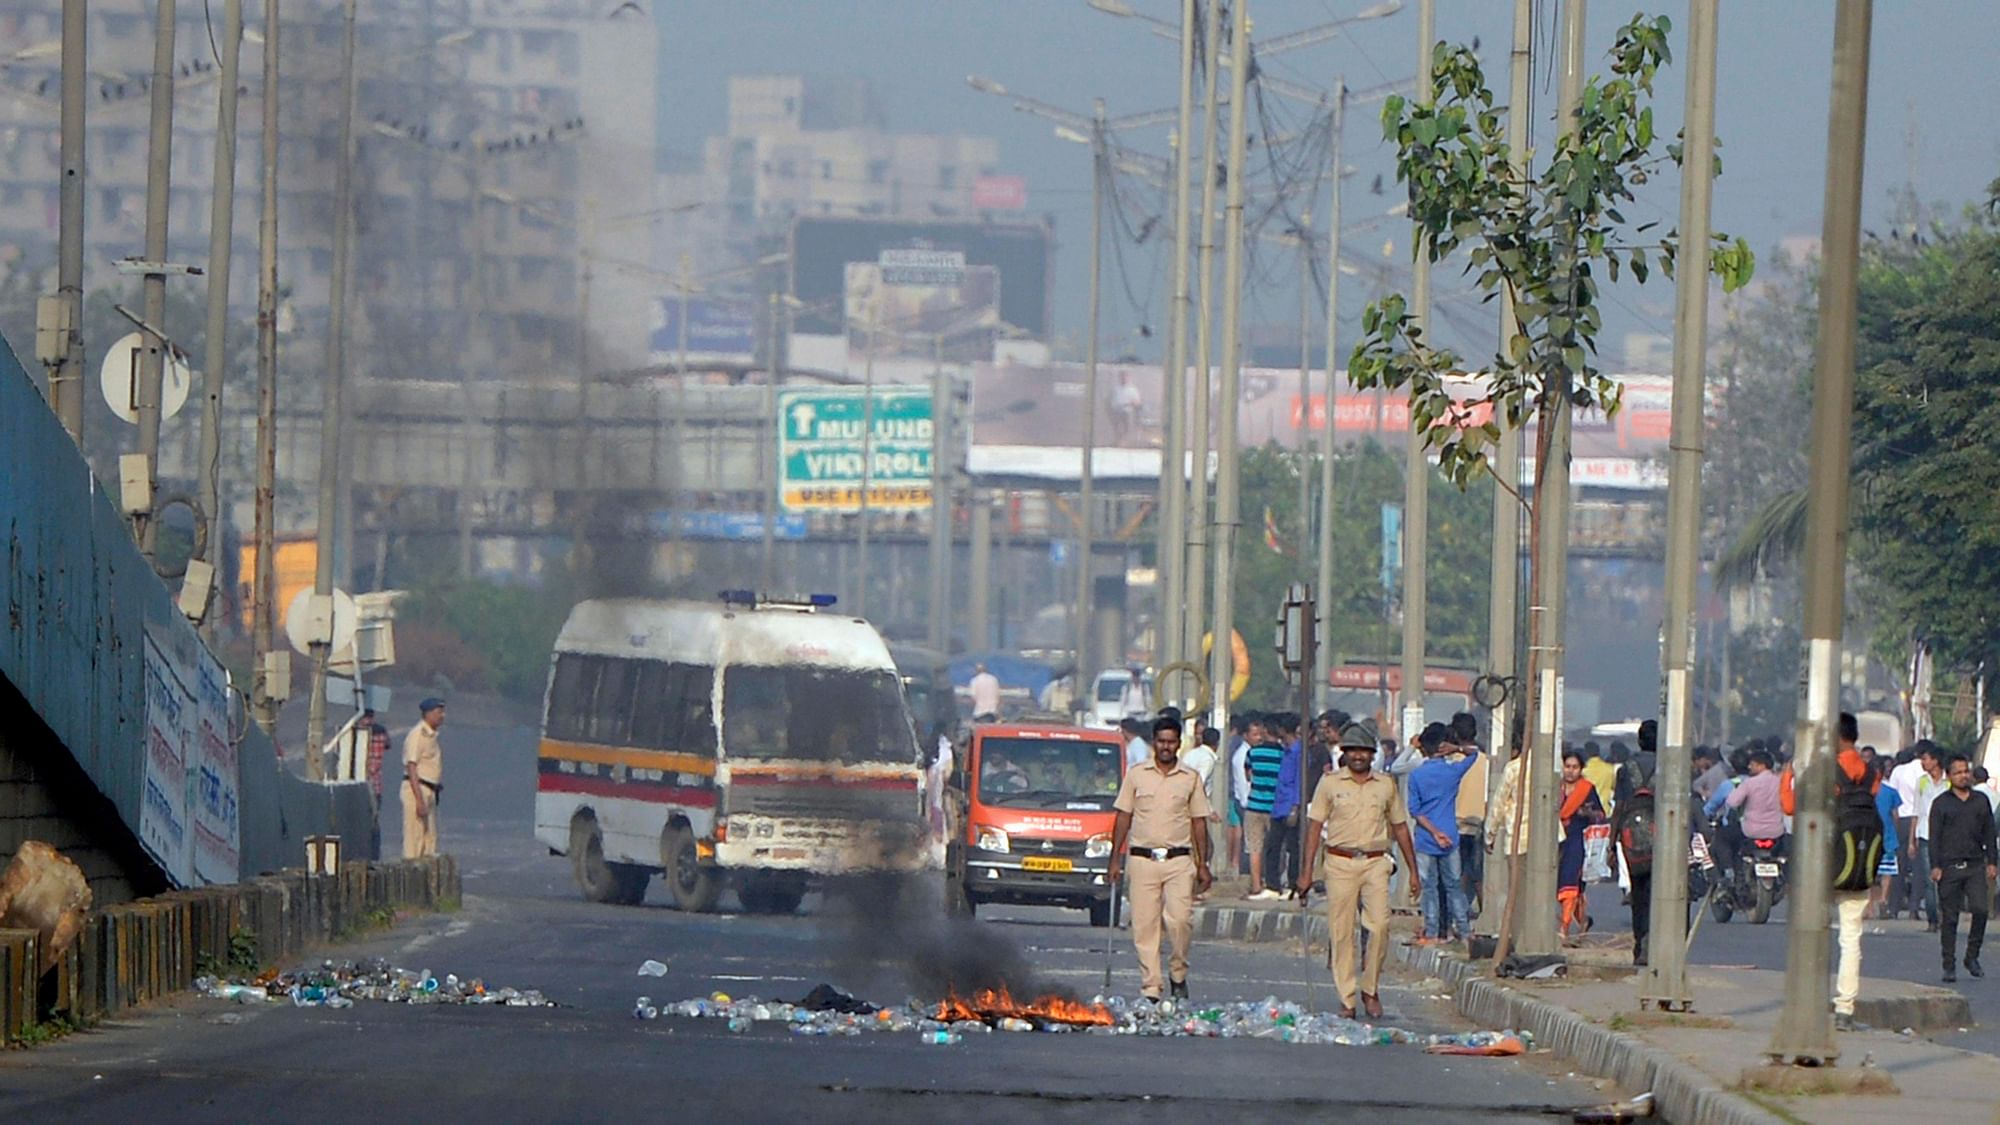 Policemen in Mumbai  try to control the situation after a violent protest by Dalits over the Bhima Koregaon unrest.